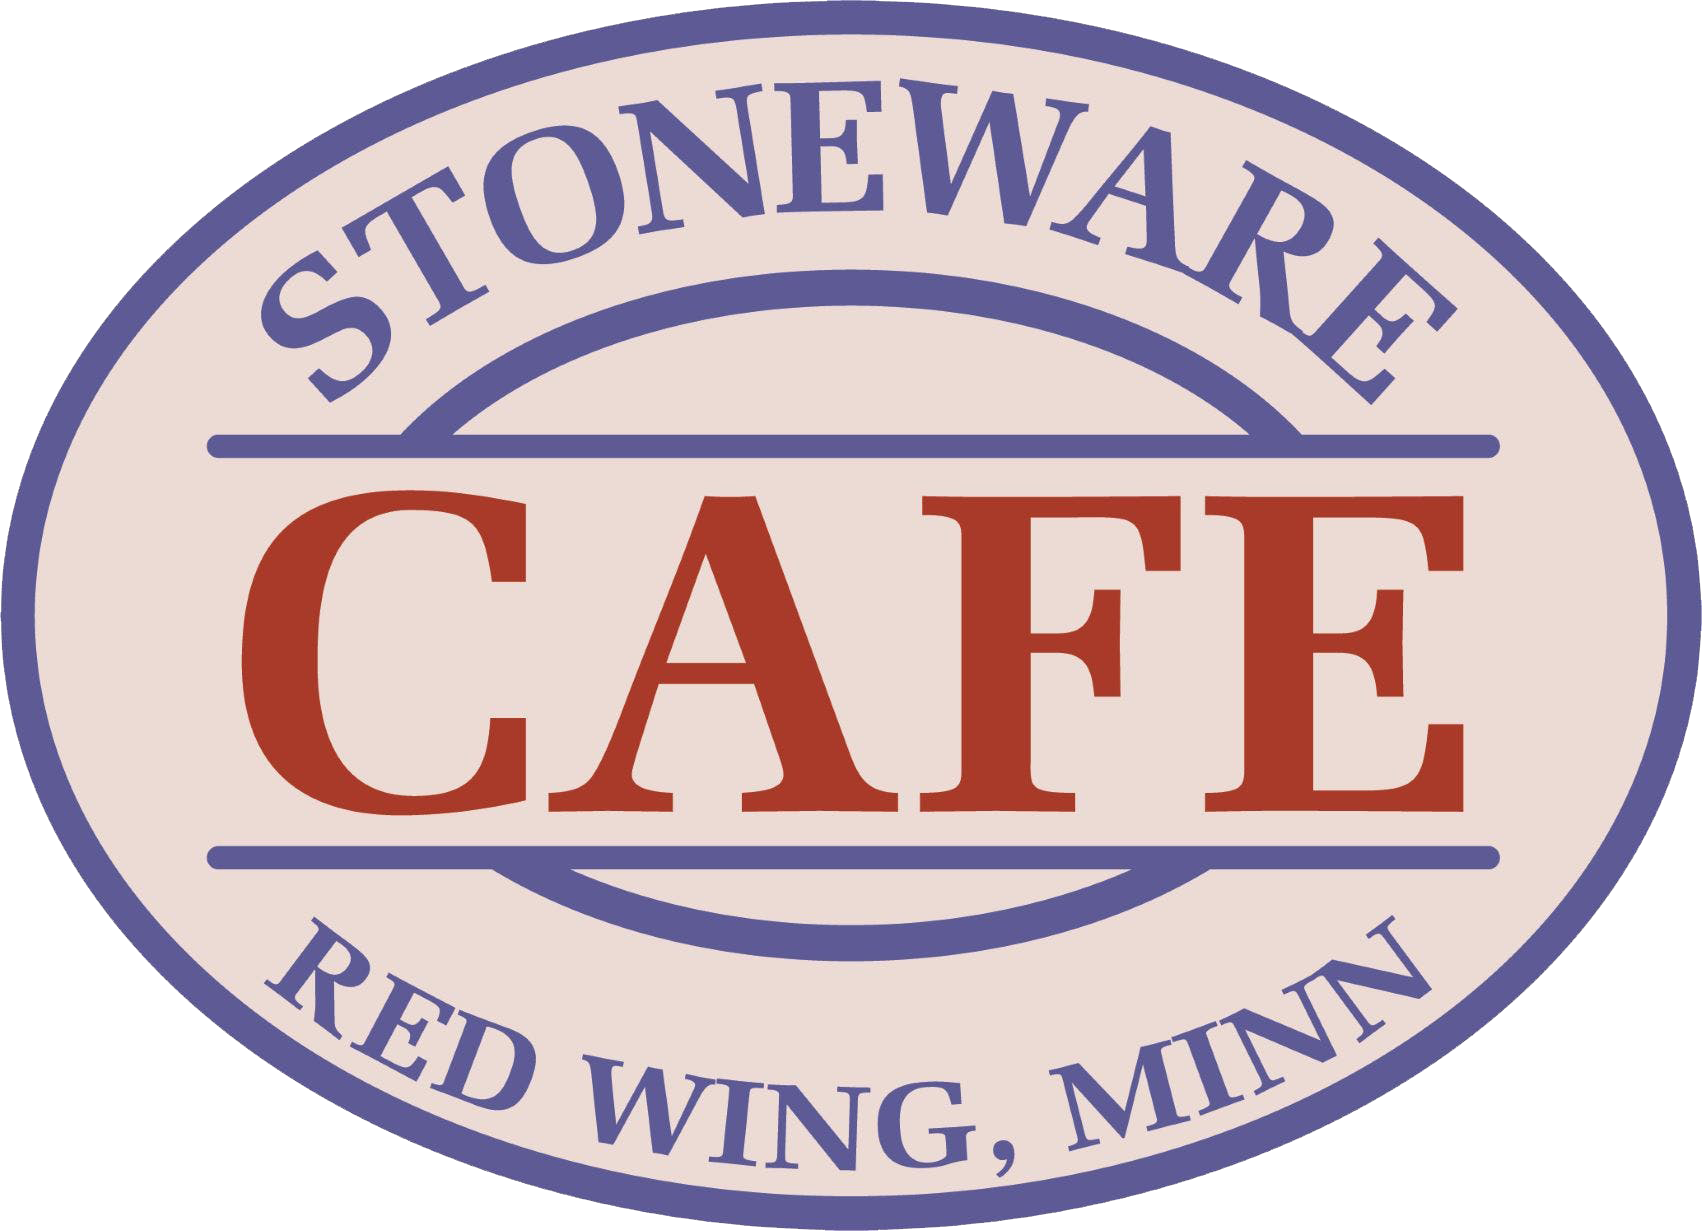 The Stoneware Cafe Home